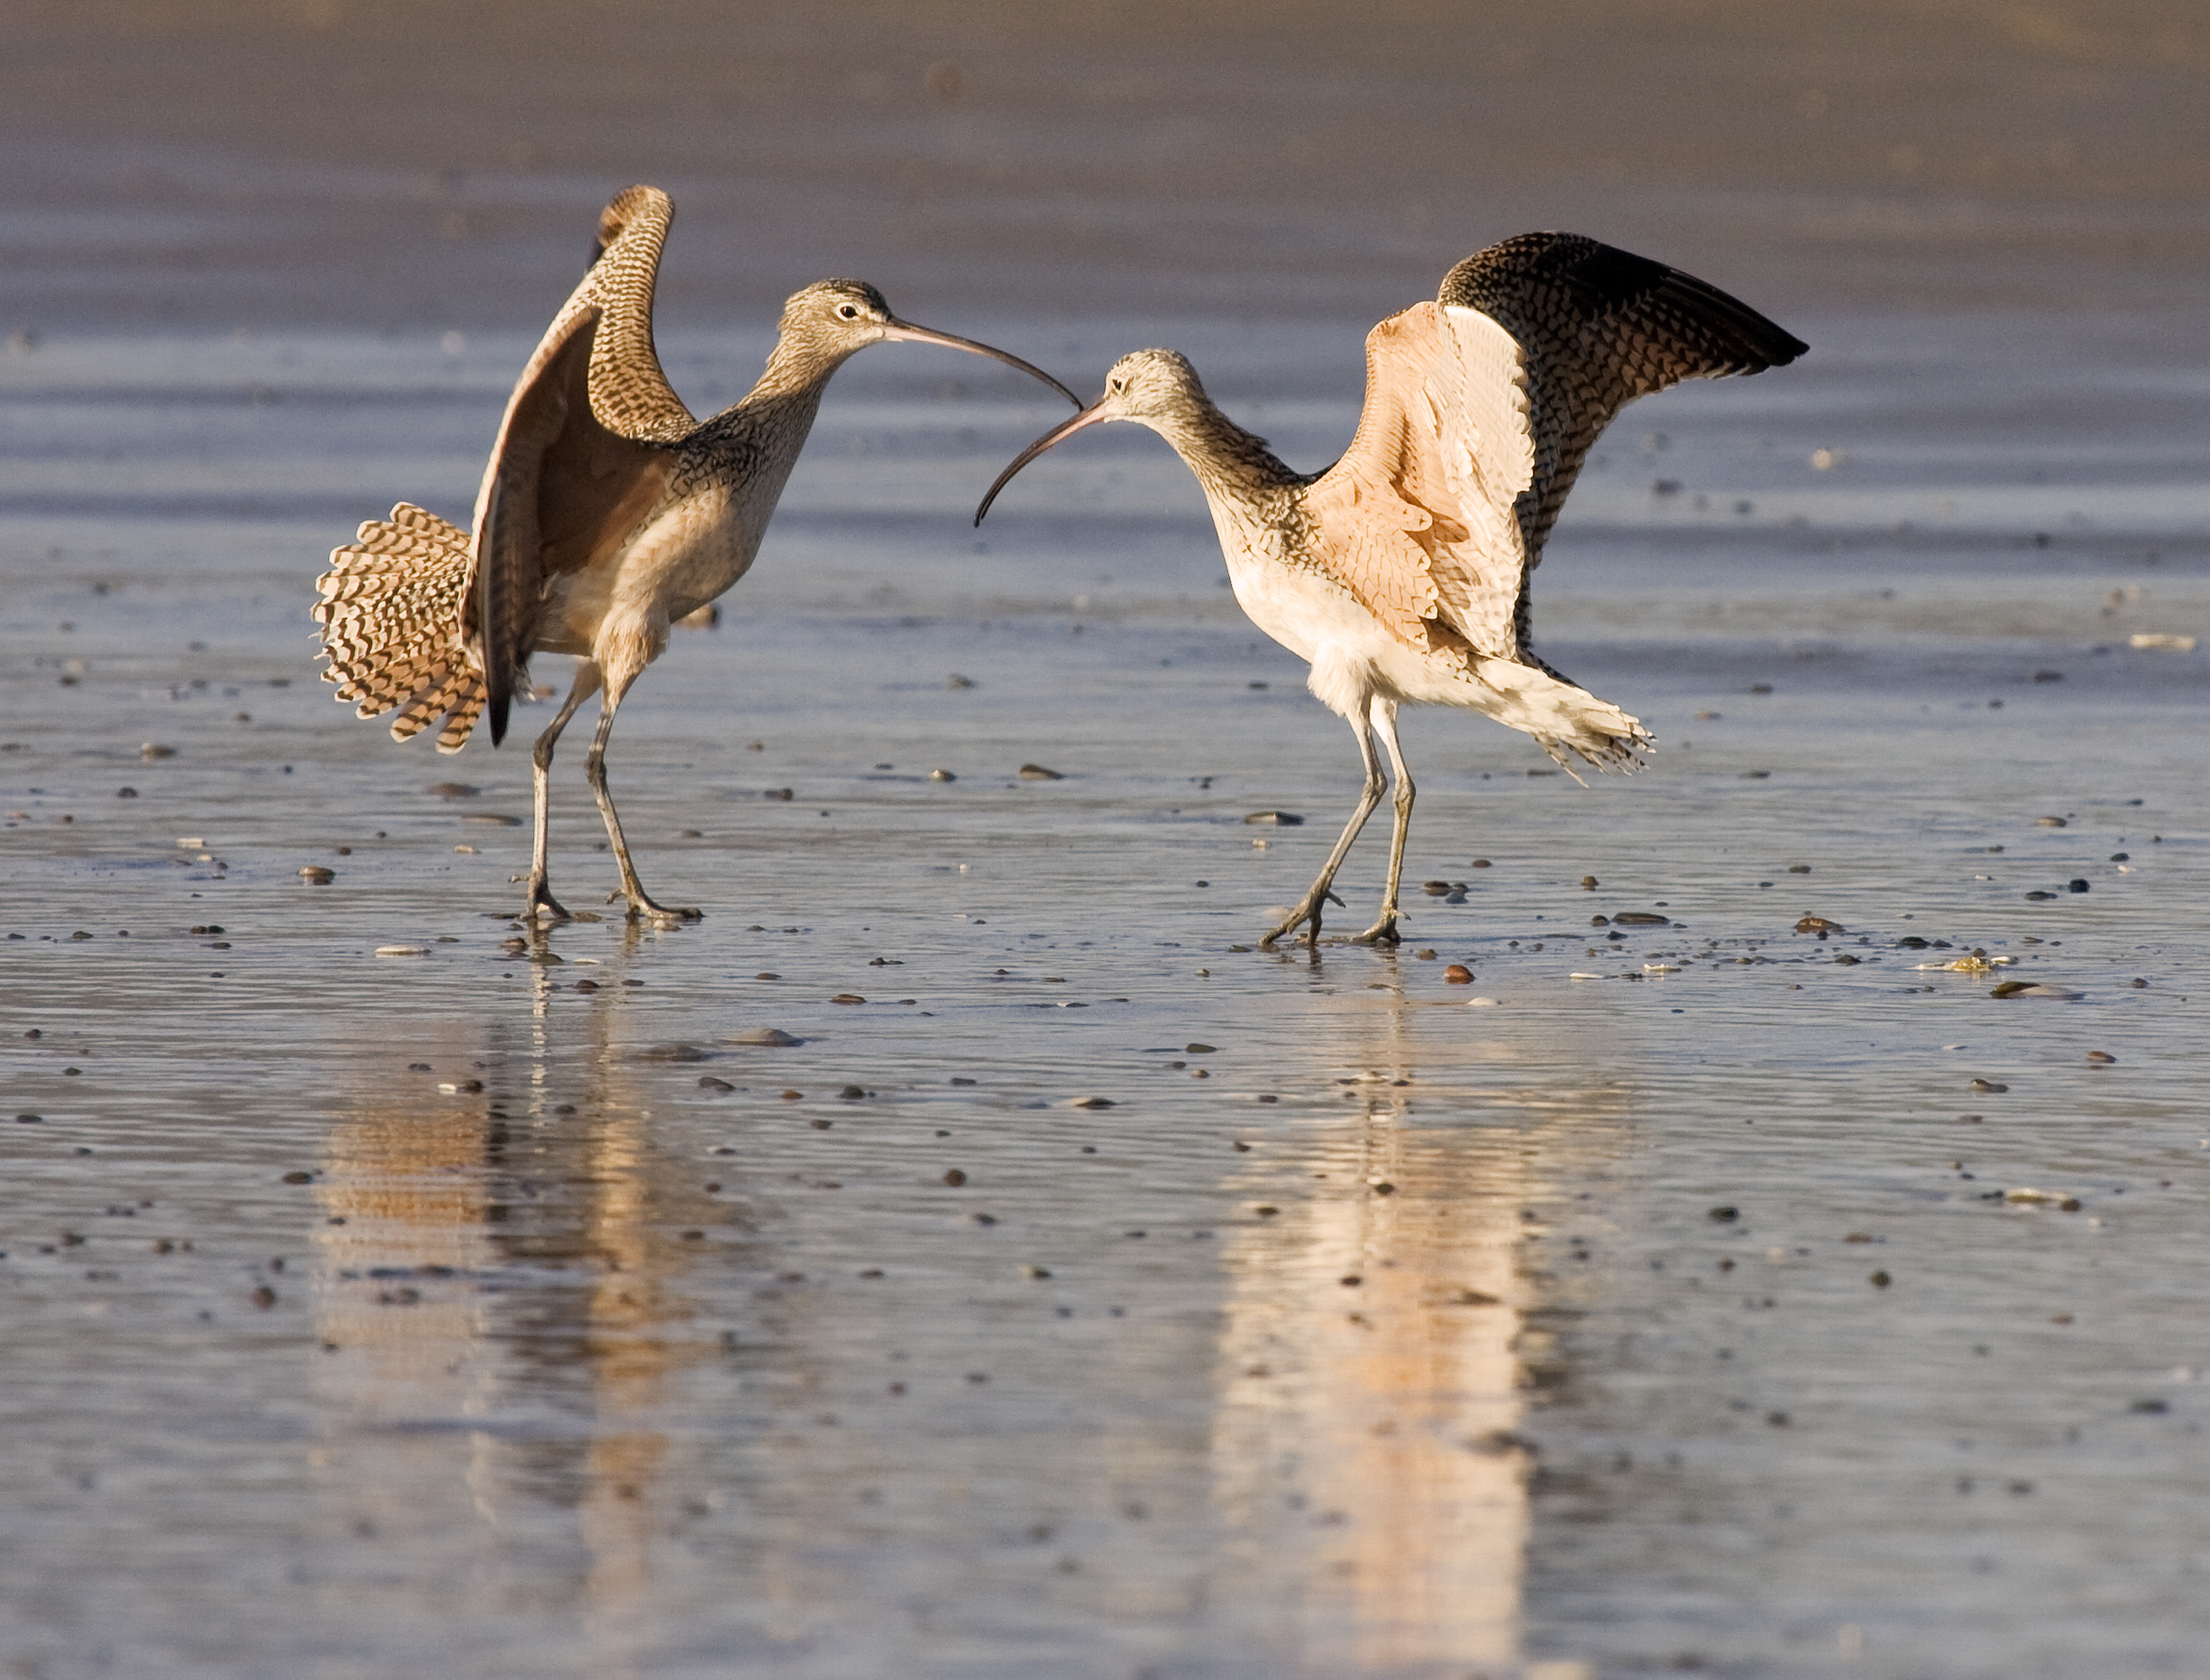 Long-billed Curlews courting